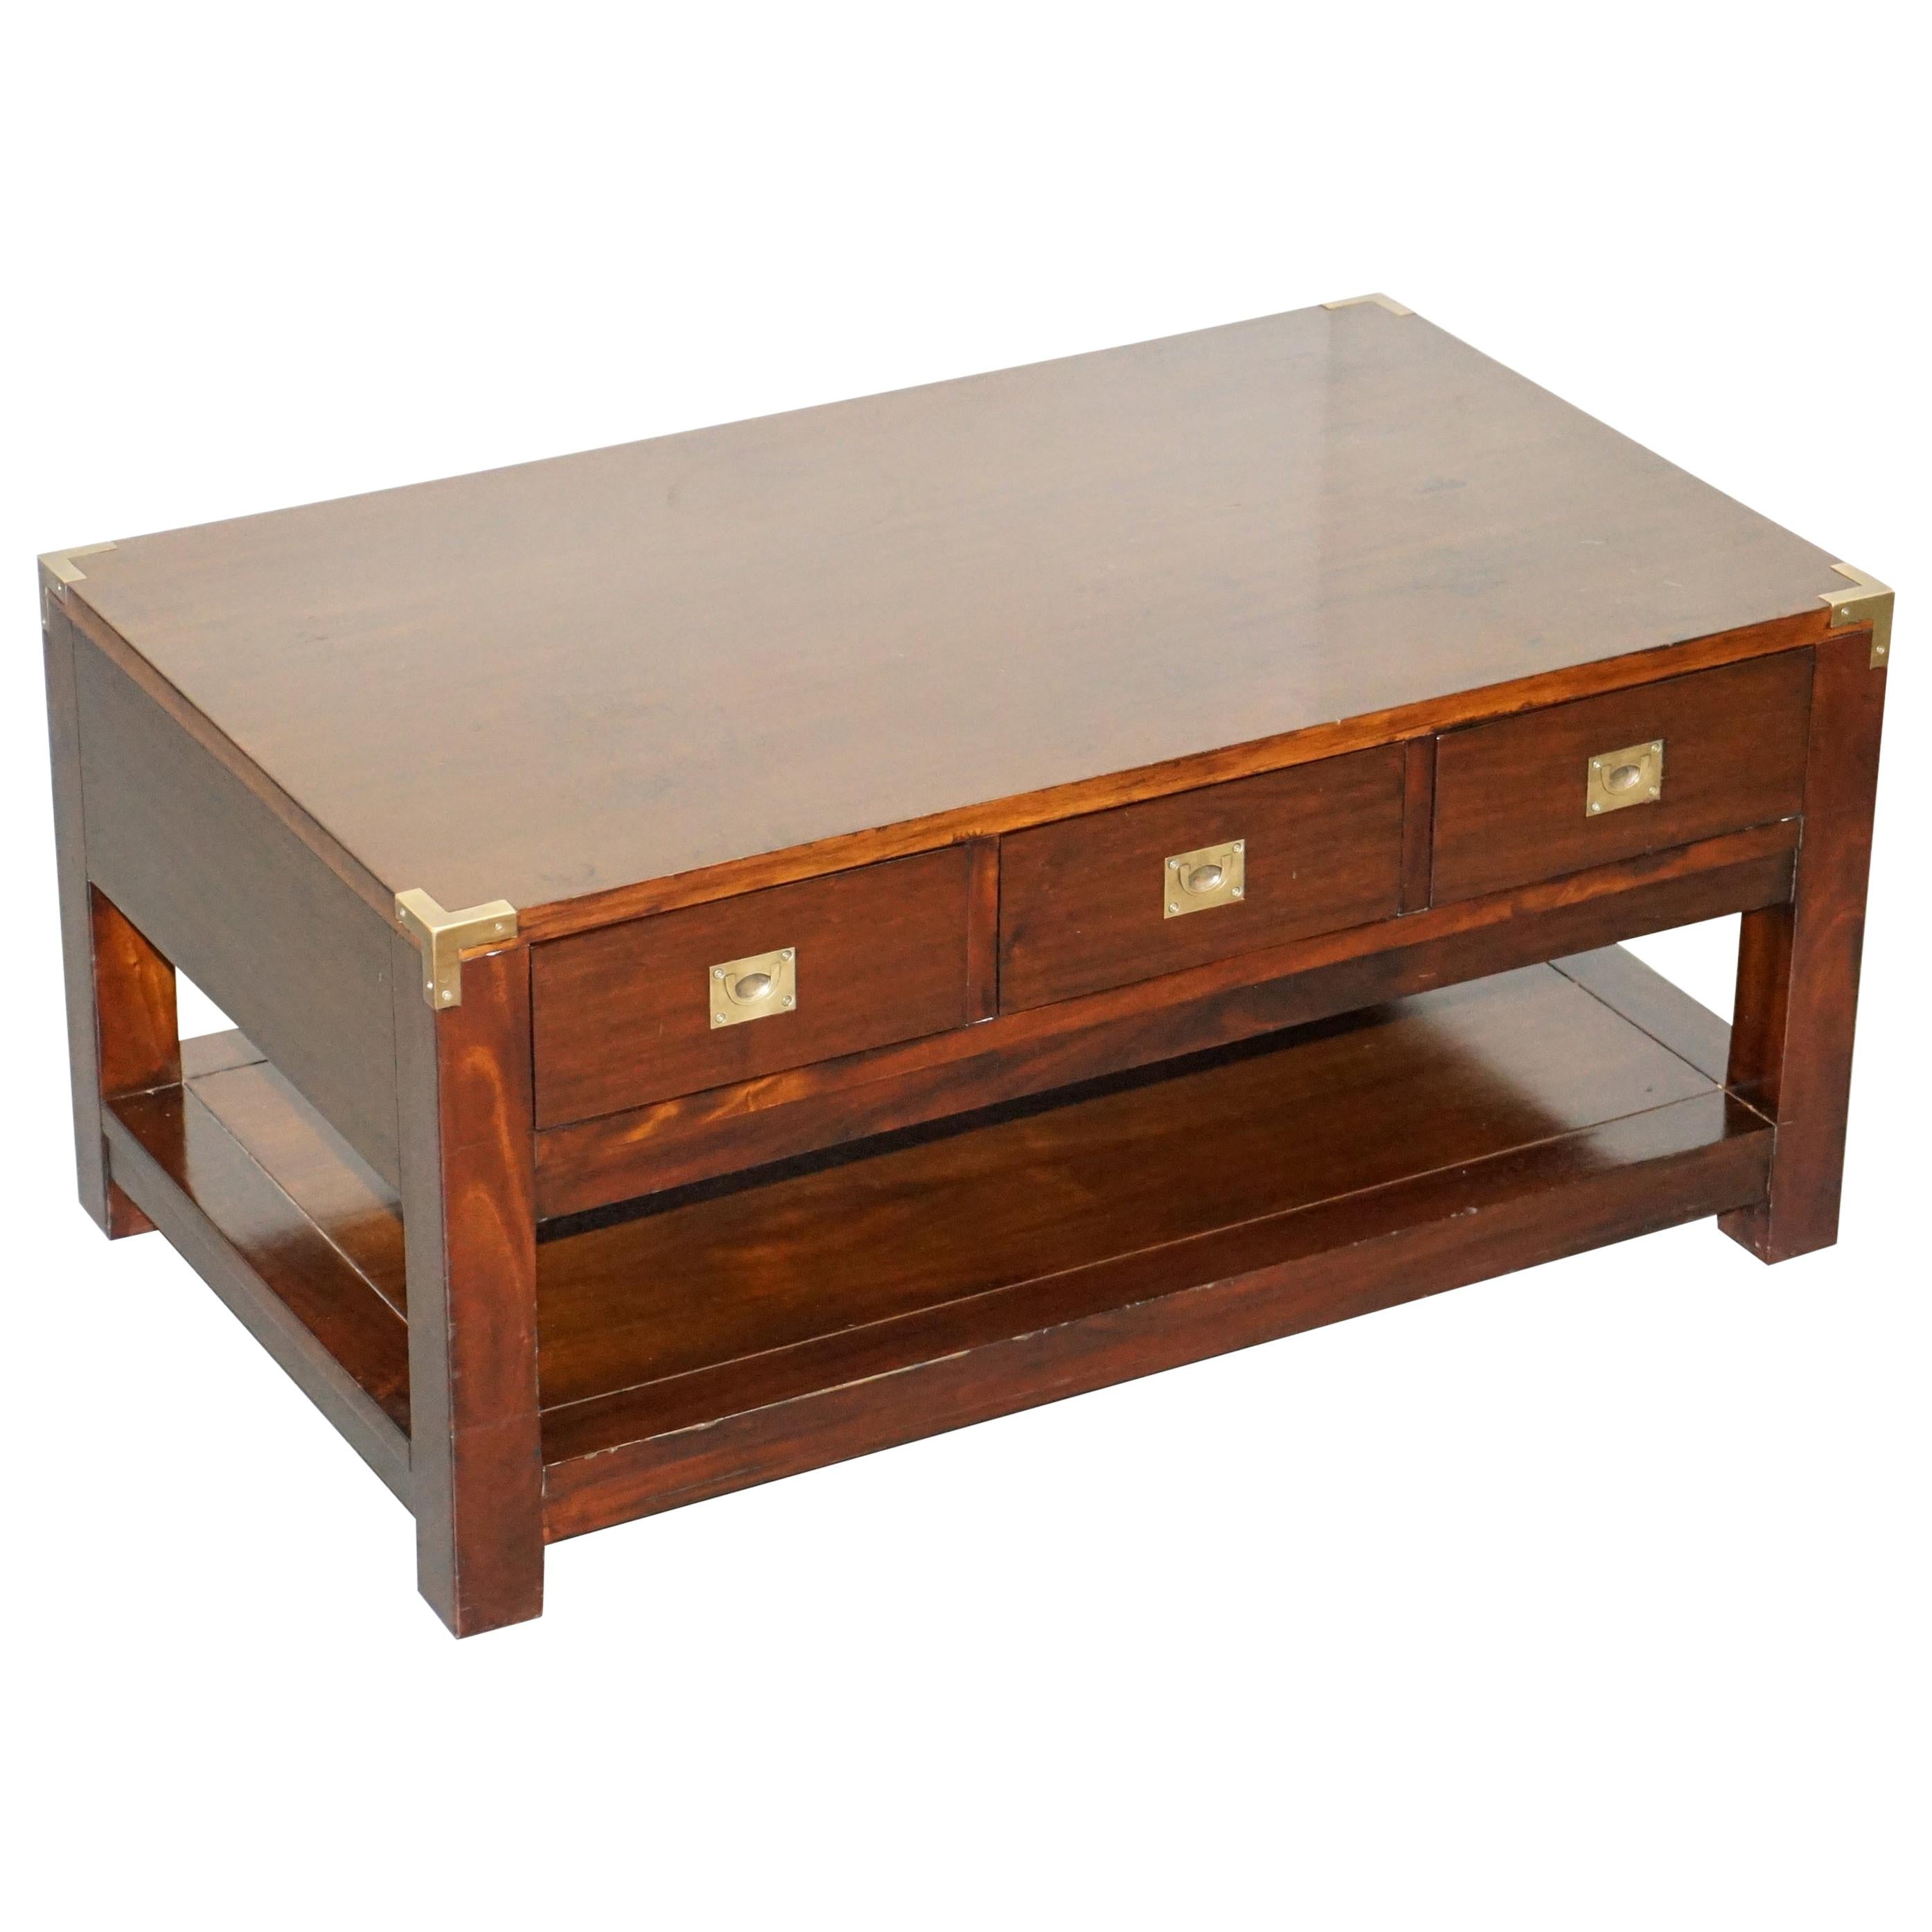 Substantial Military Campaign Style Hardwood and Brass Coffee Table with Drawers